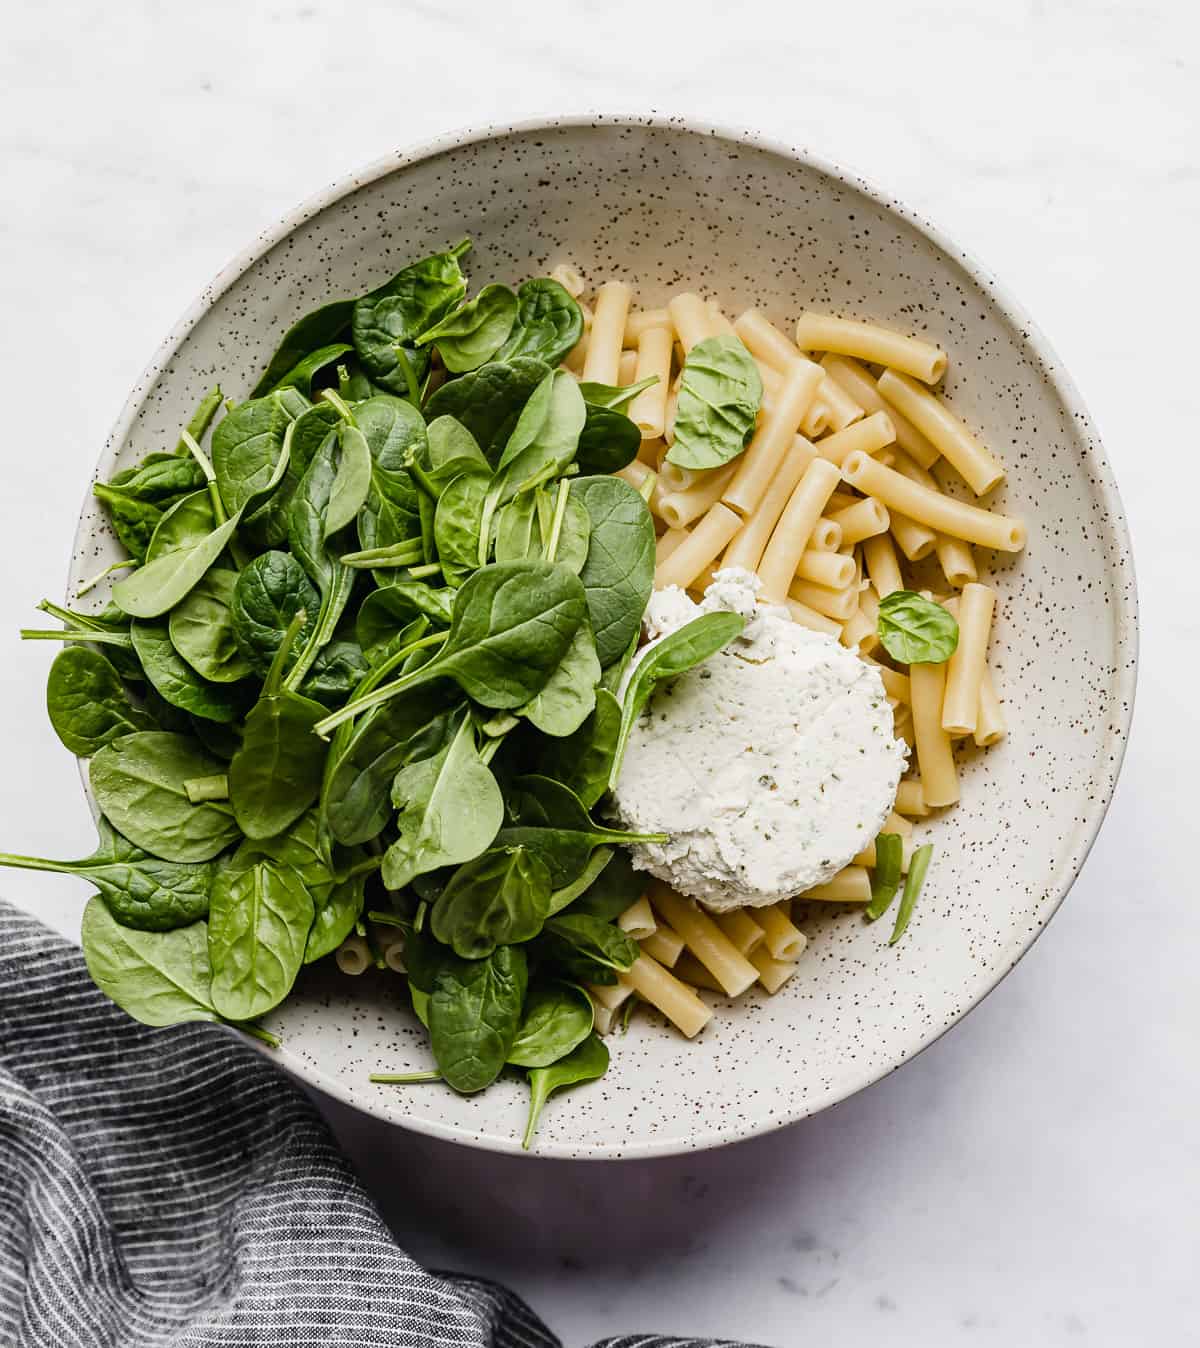 A bowl with cooked pasta noodles, chopped spinach and boursin cheese in it.